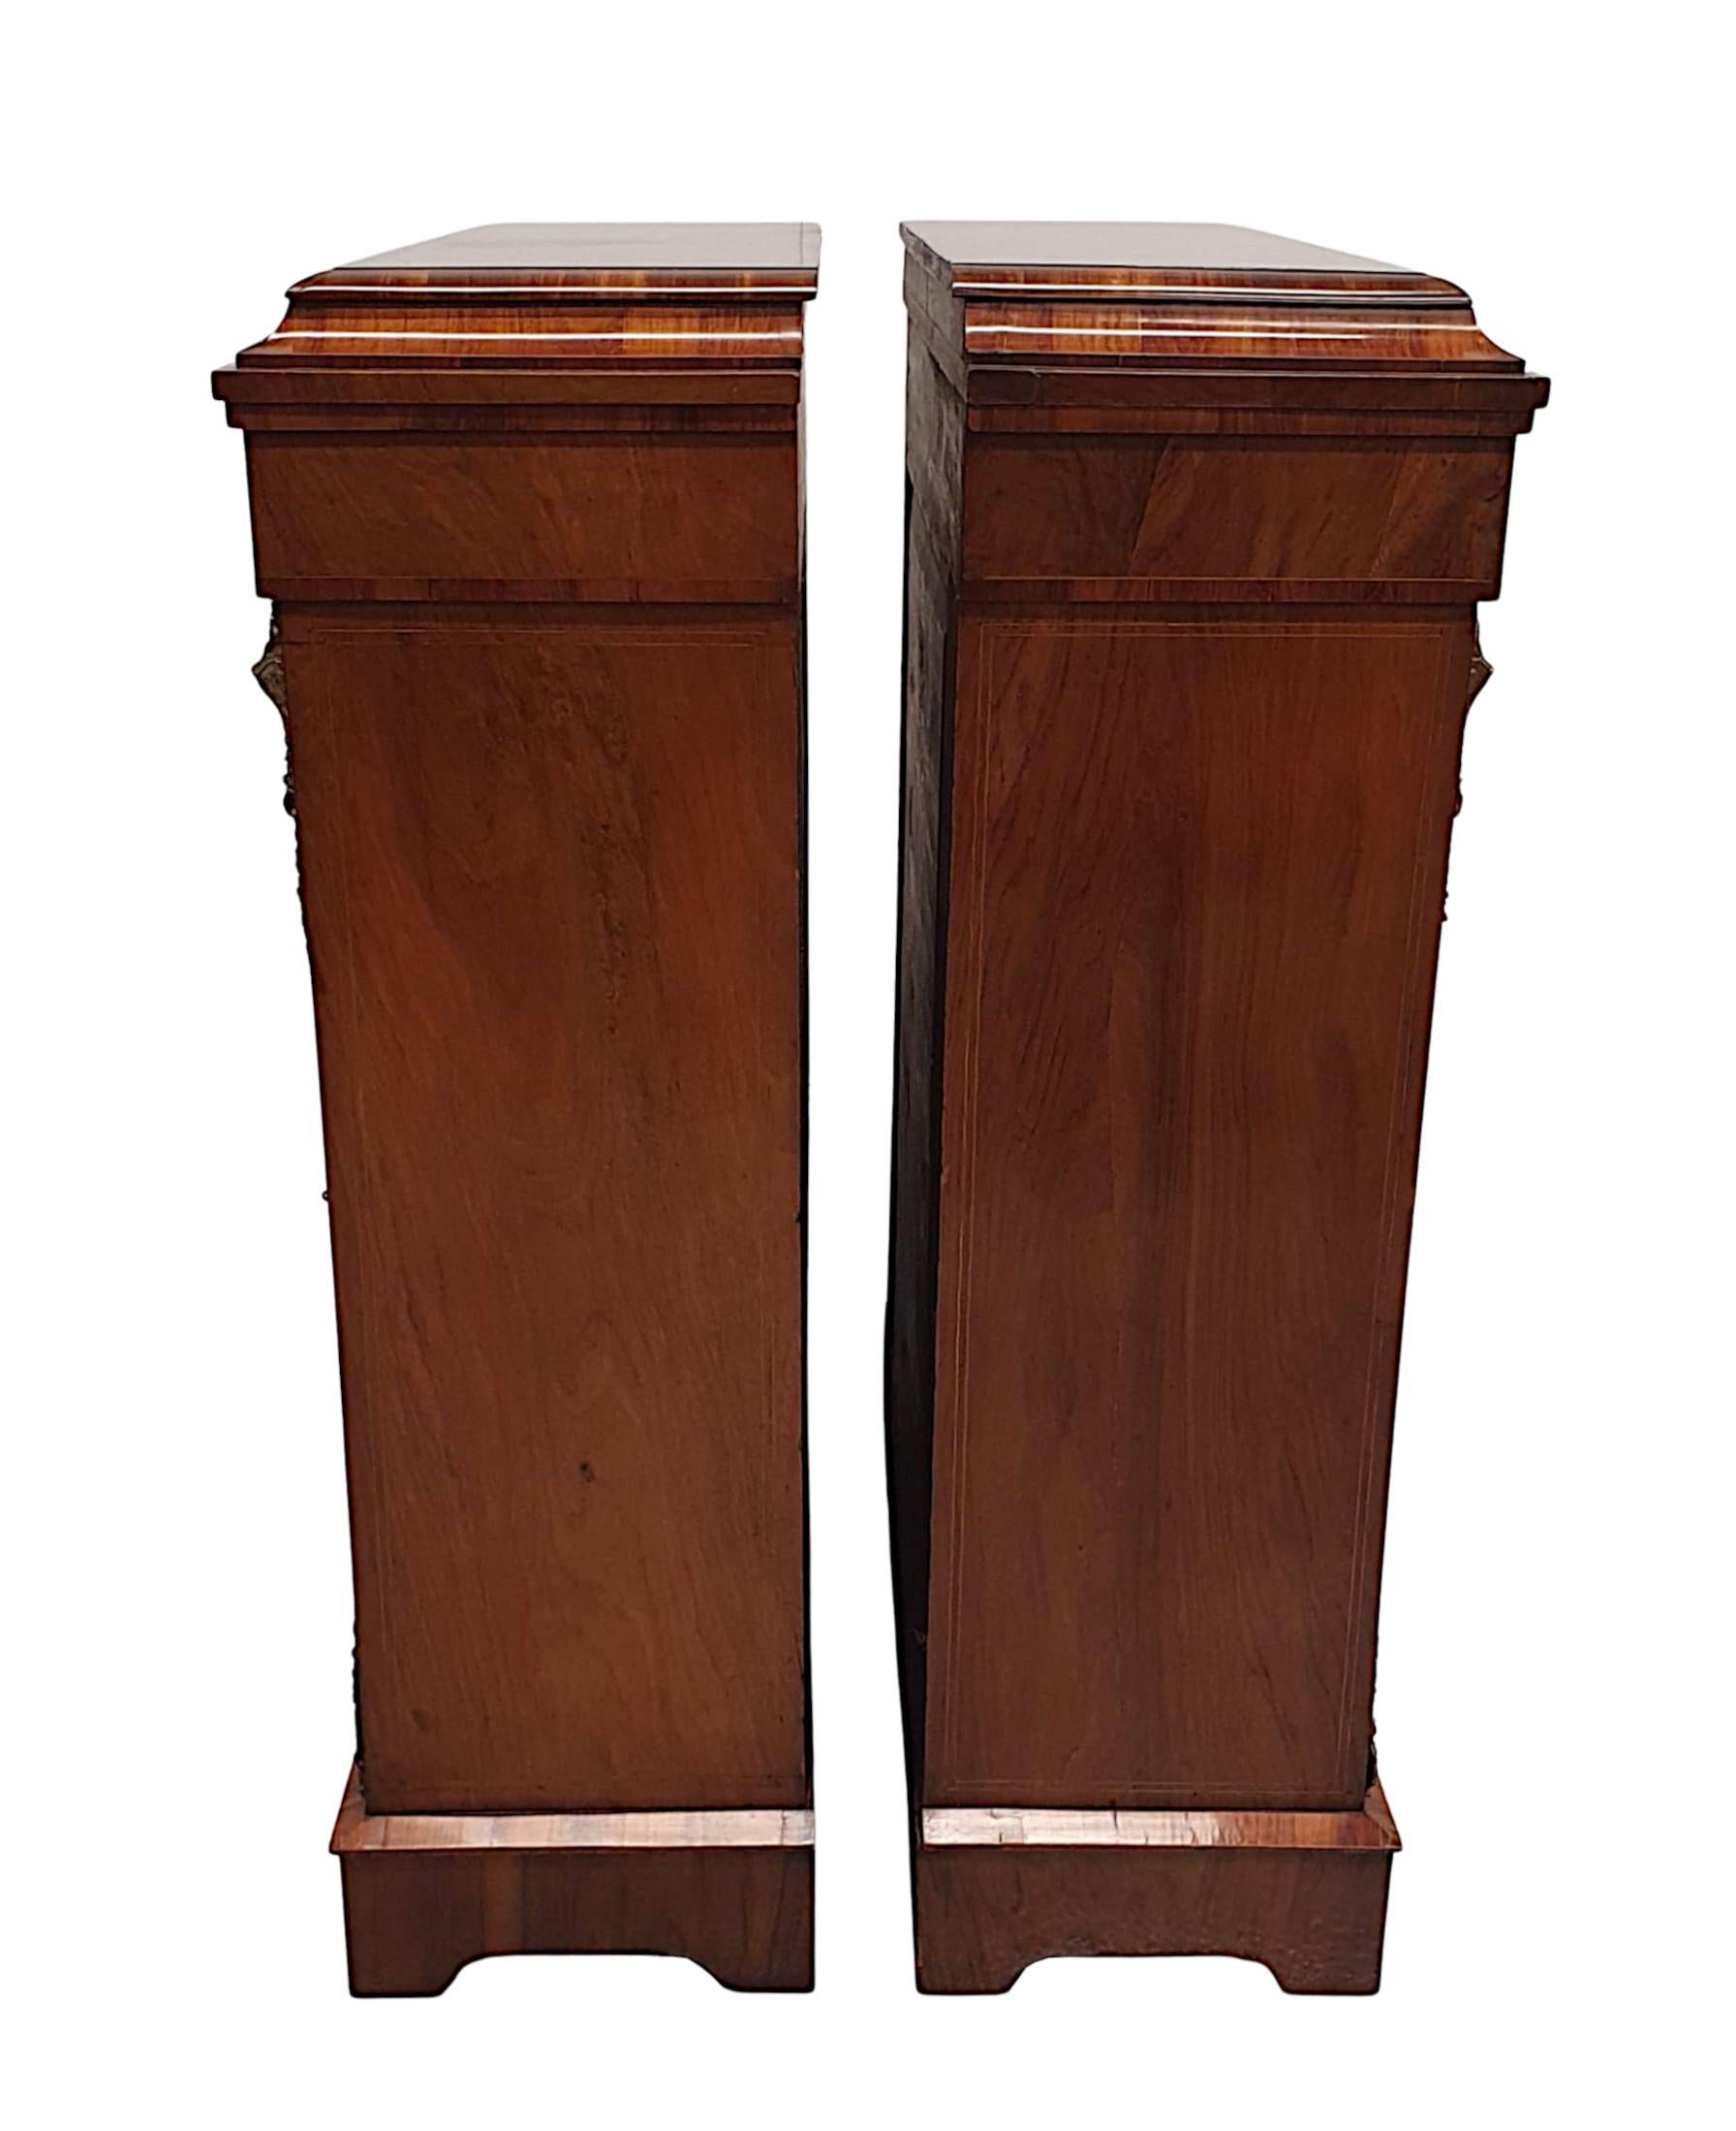 Exceptional Pair of Rare 19th Century Pier Cabinets or Bookcases For Sale 1